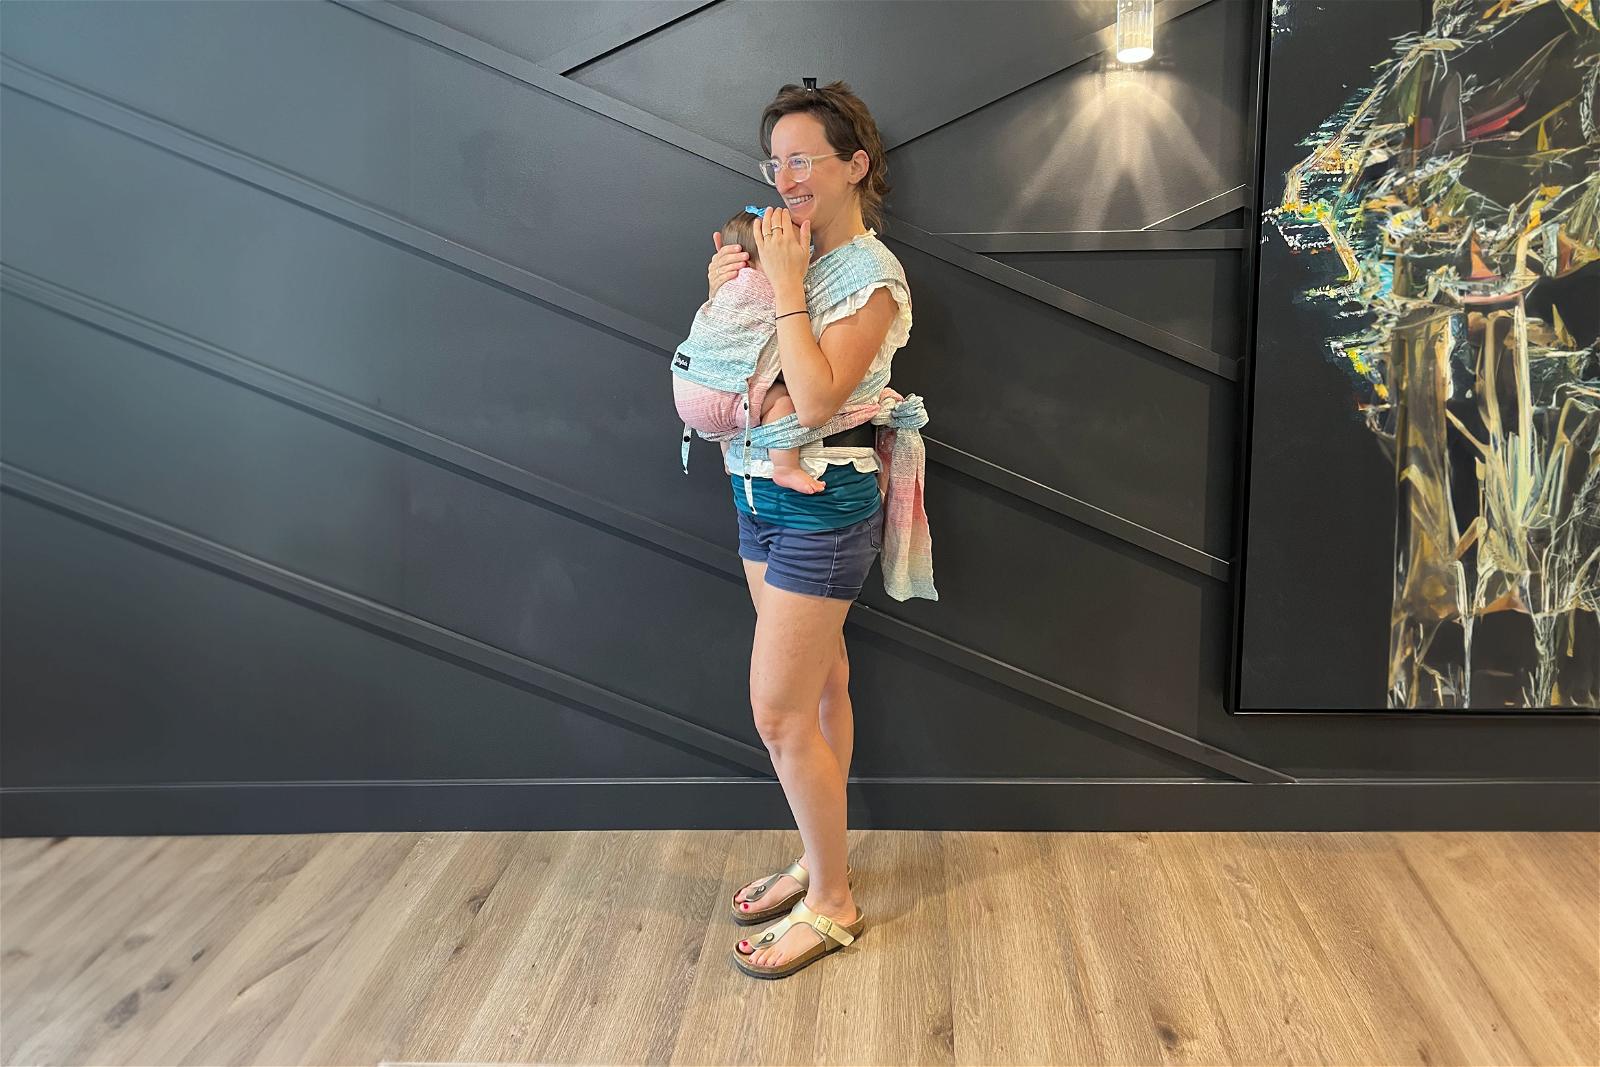 The Best Baby Carriers for Travel (Packable, Comfortable and Lightweight)